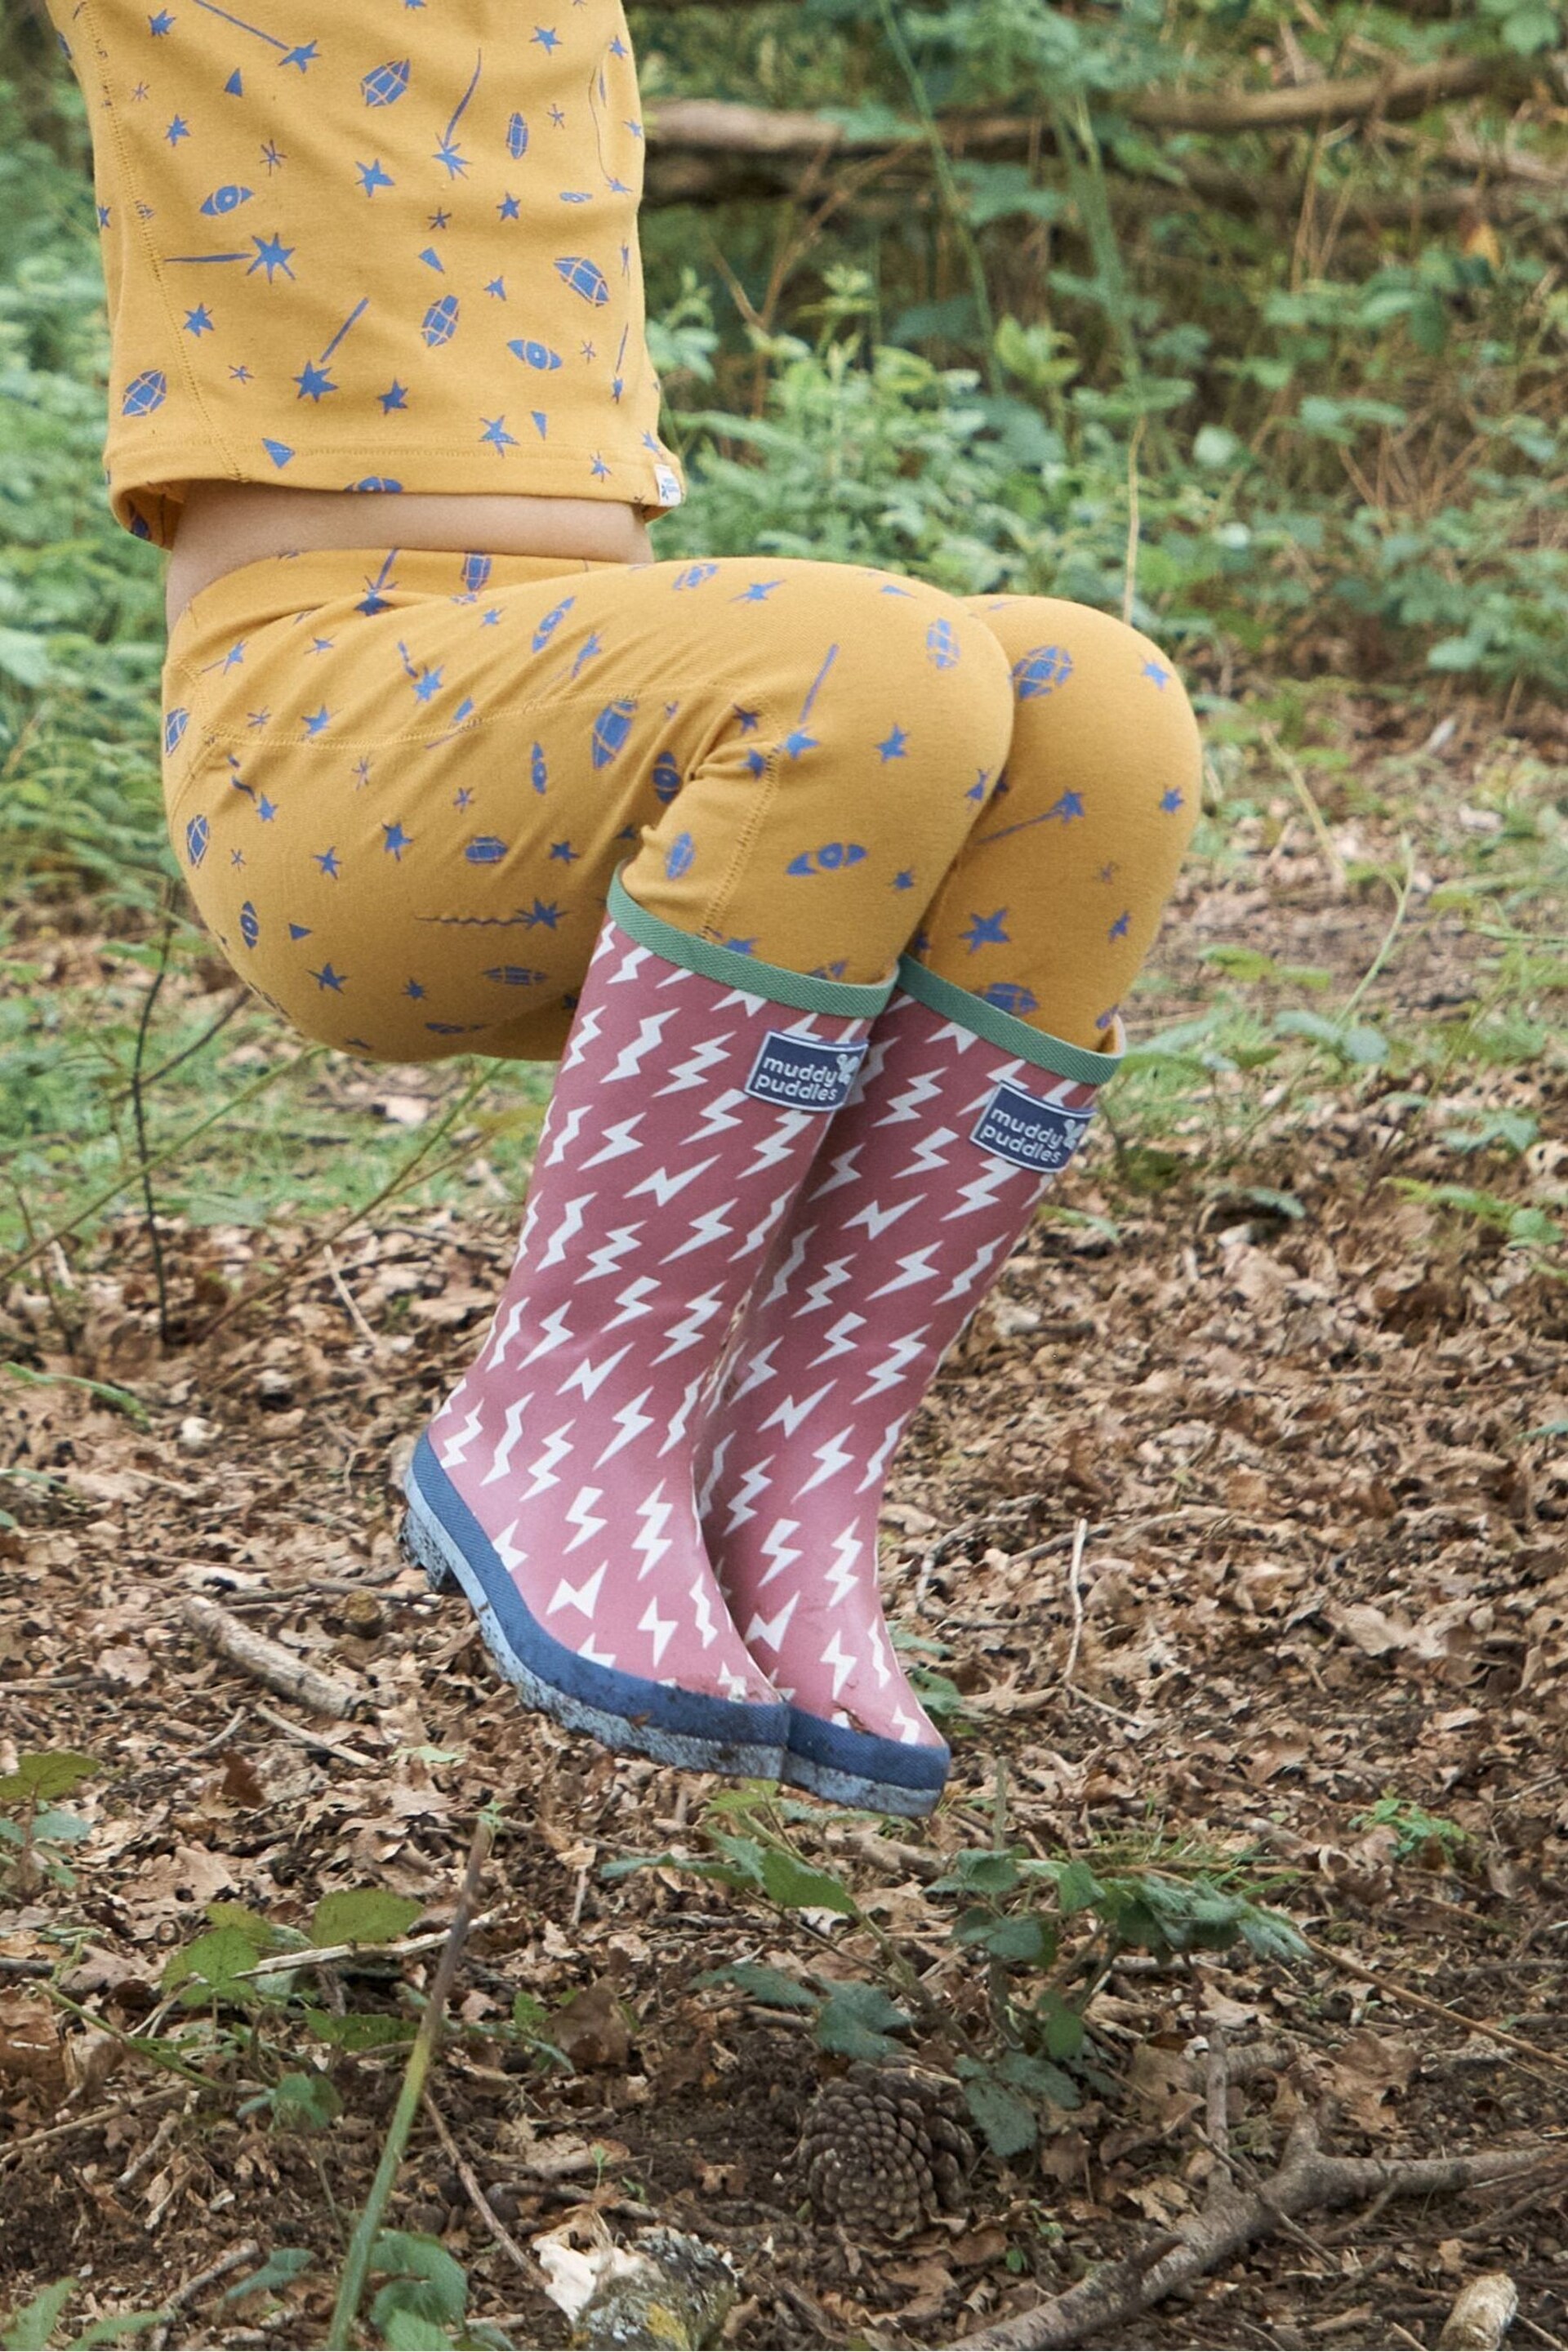 Muddy Puddles Puddlestomper Wellies - Image 3 of 3